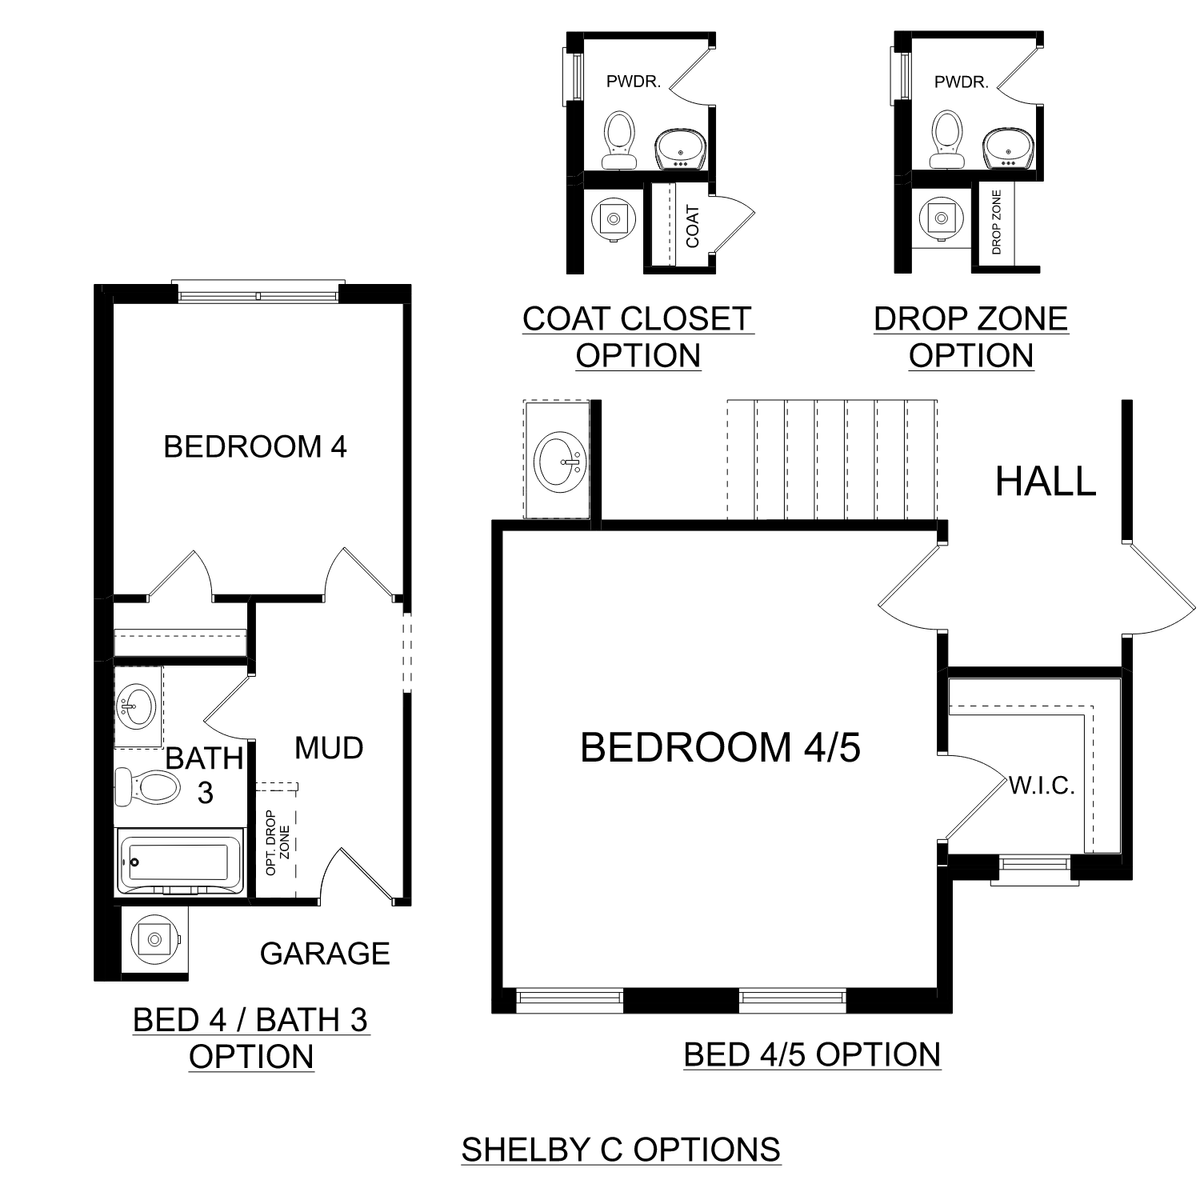 3 - The Shelby C buildable floor plan layout in Davidson Homes' Watts Glen community.